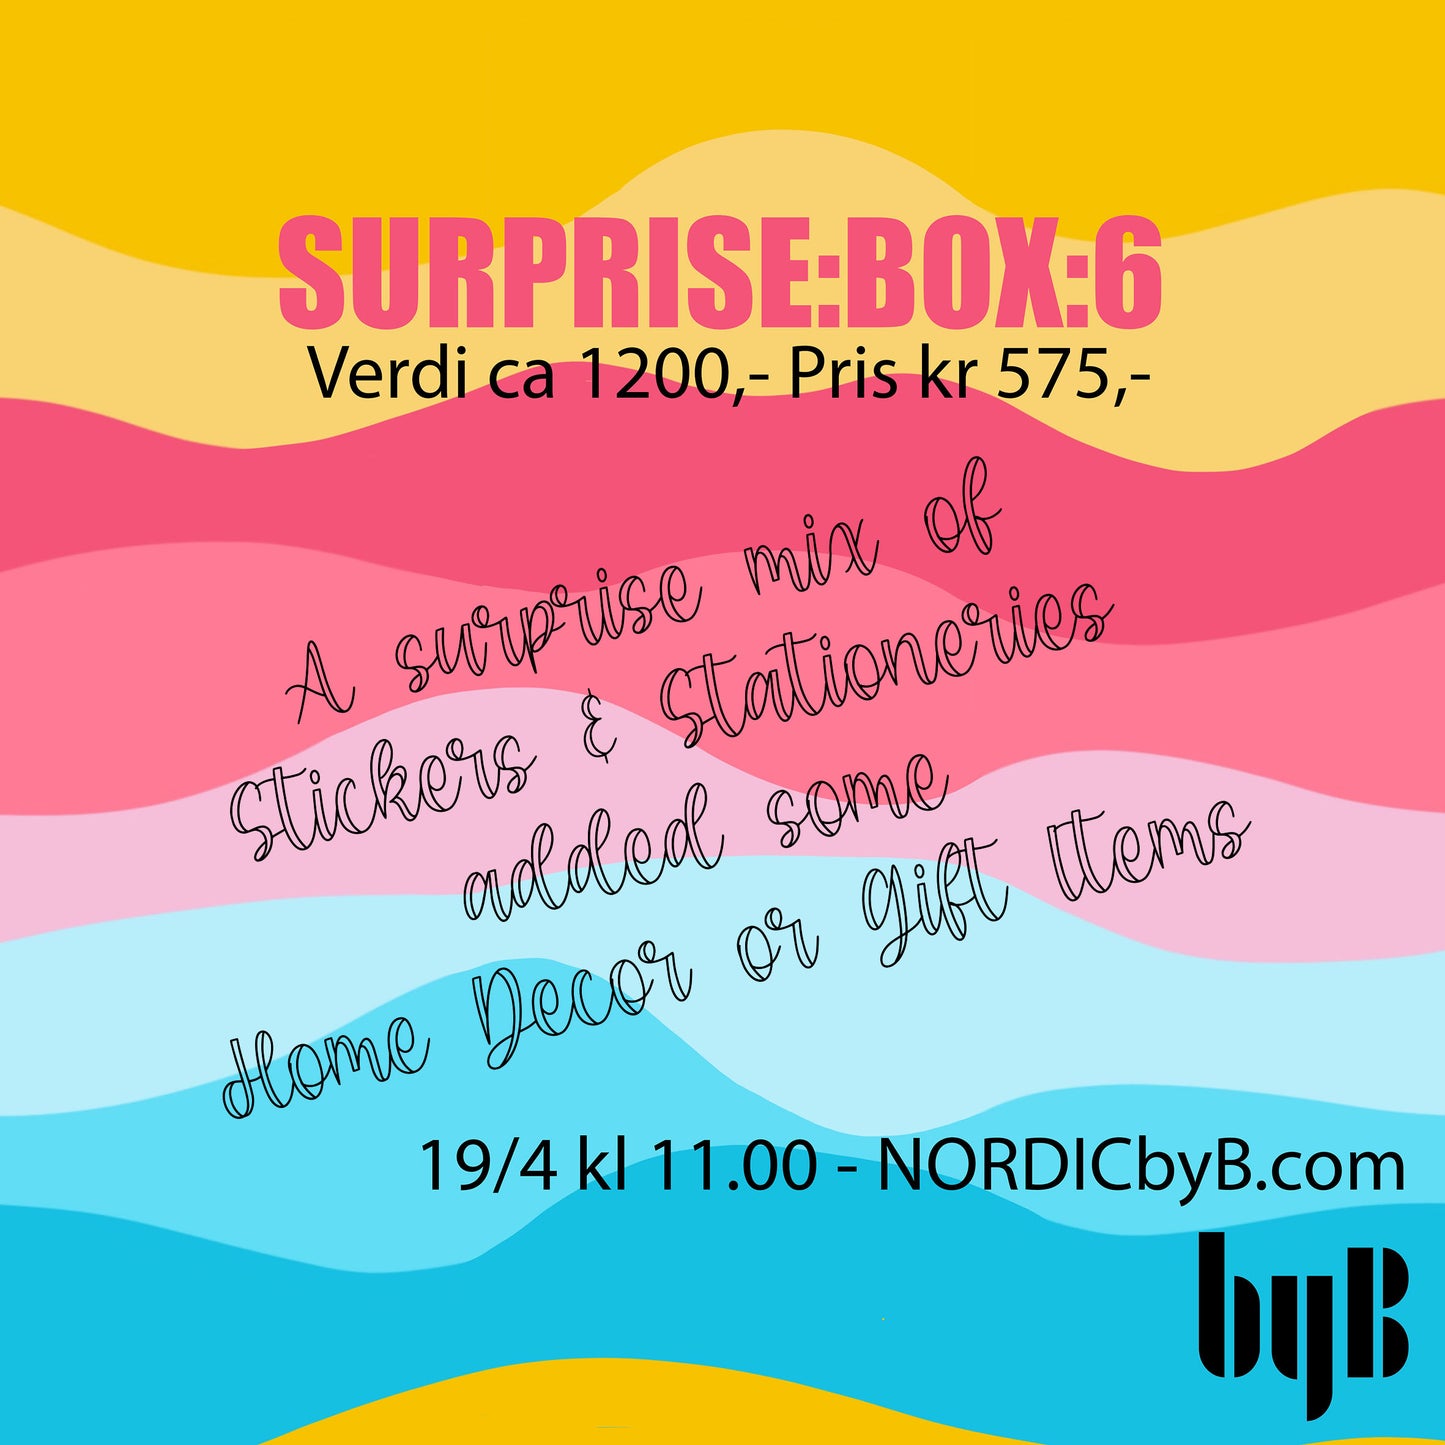 SURPRISE:BOX:6 - a surprise mix of stickers, stationery, home decor, gifts